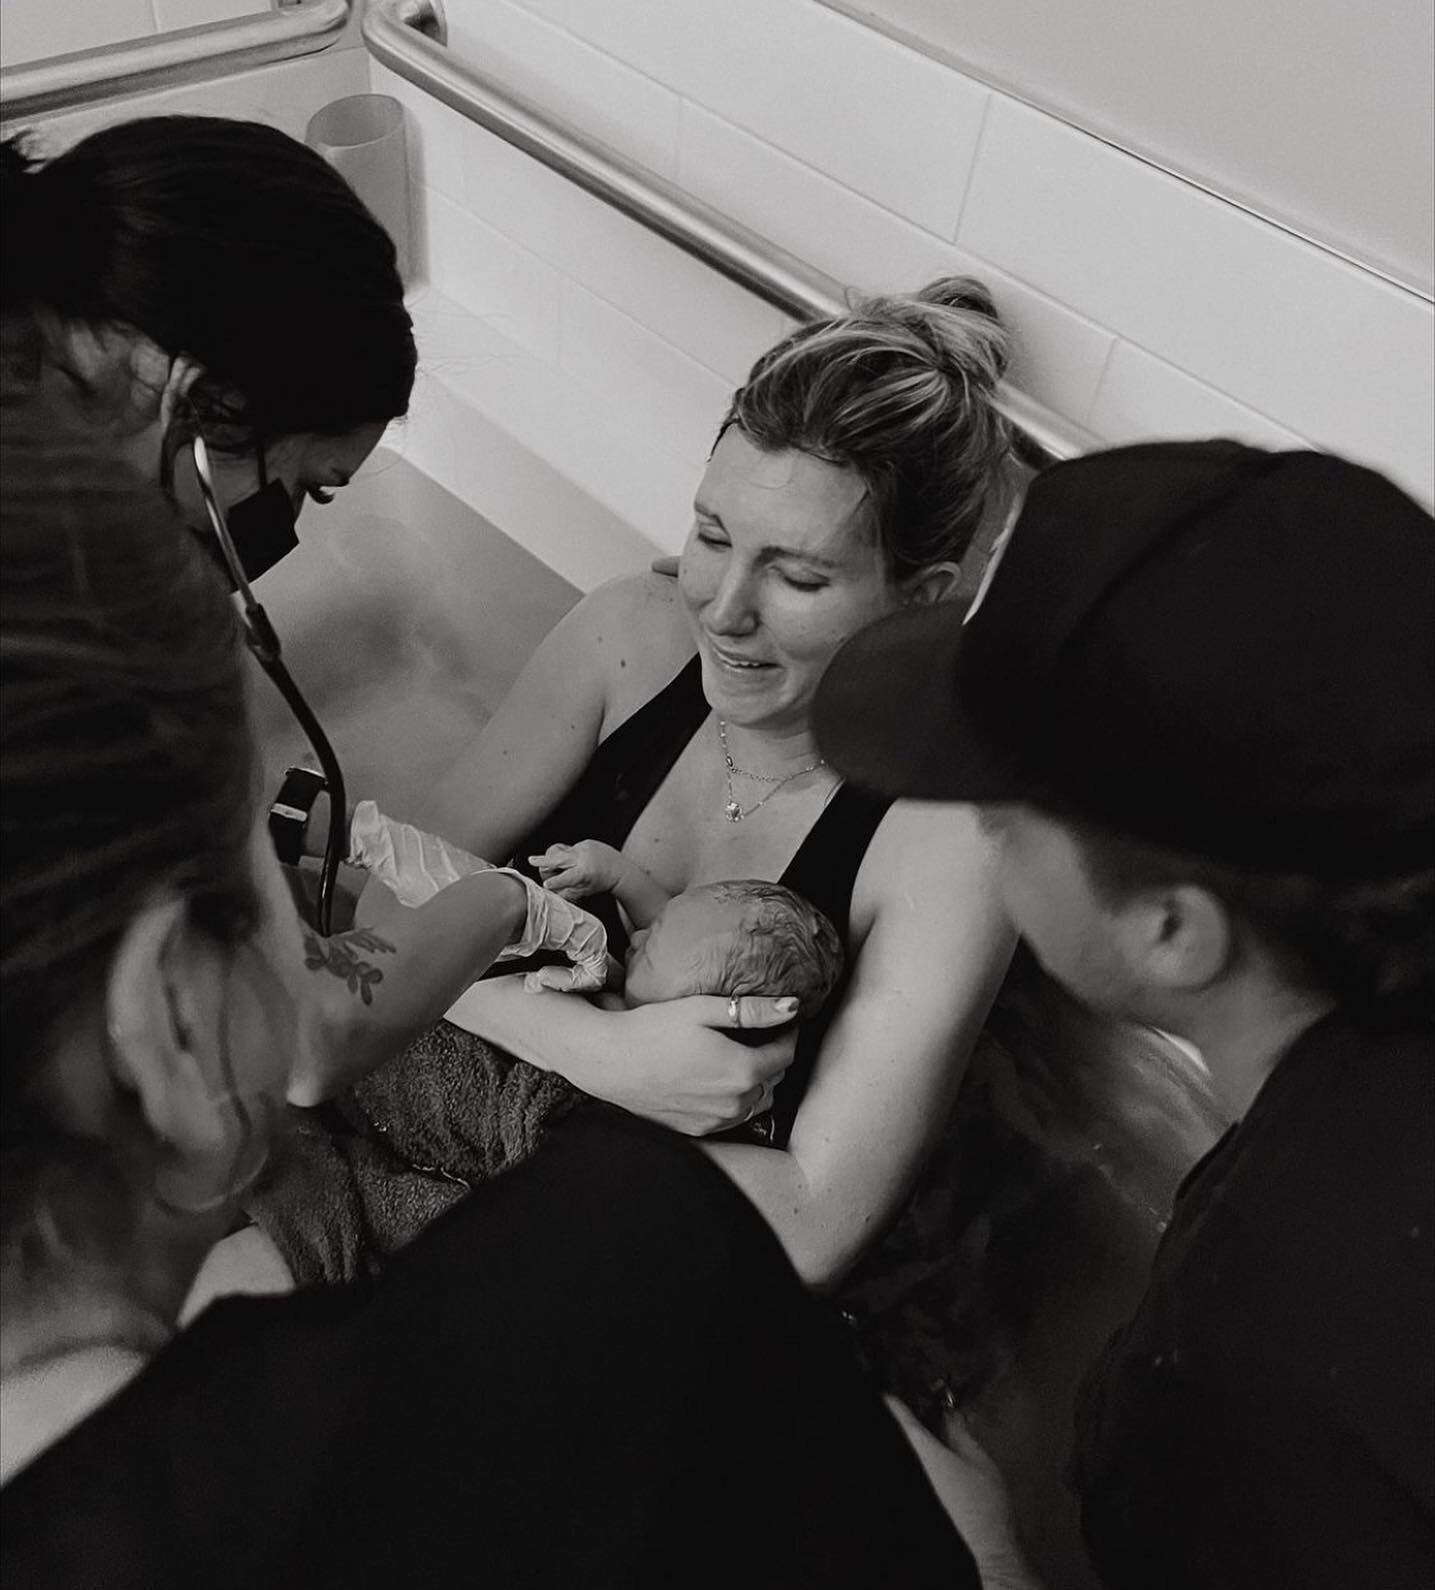 &ldquo;My wonderful midwives helped Spencer to catch him in the water at 9:57pm. It's surreal to think this was only a week ago. Just so grateful for my body, Spencer, the short 4 hours of
active labor, and the support system of amazing midwives who 